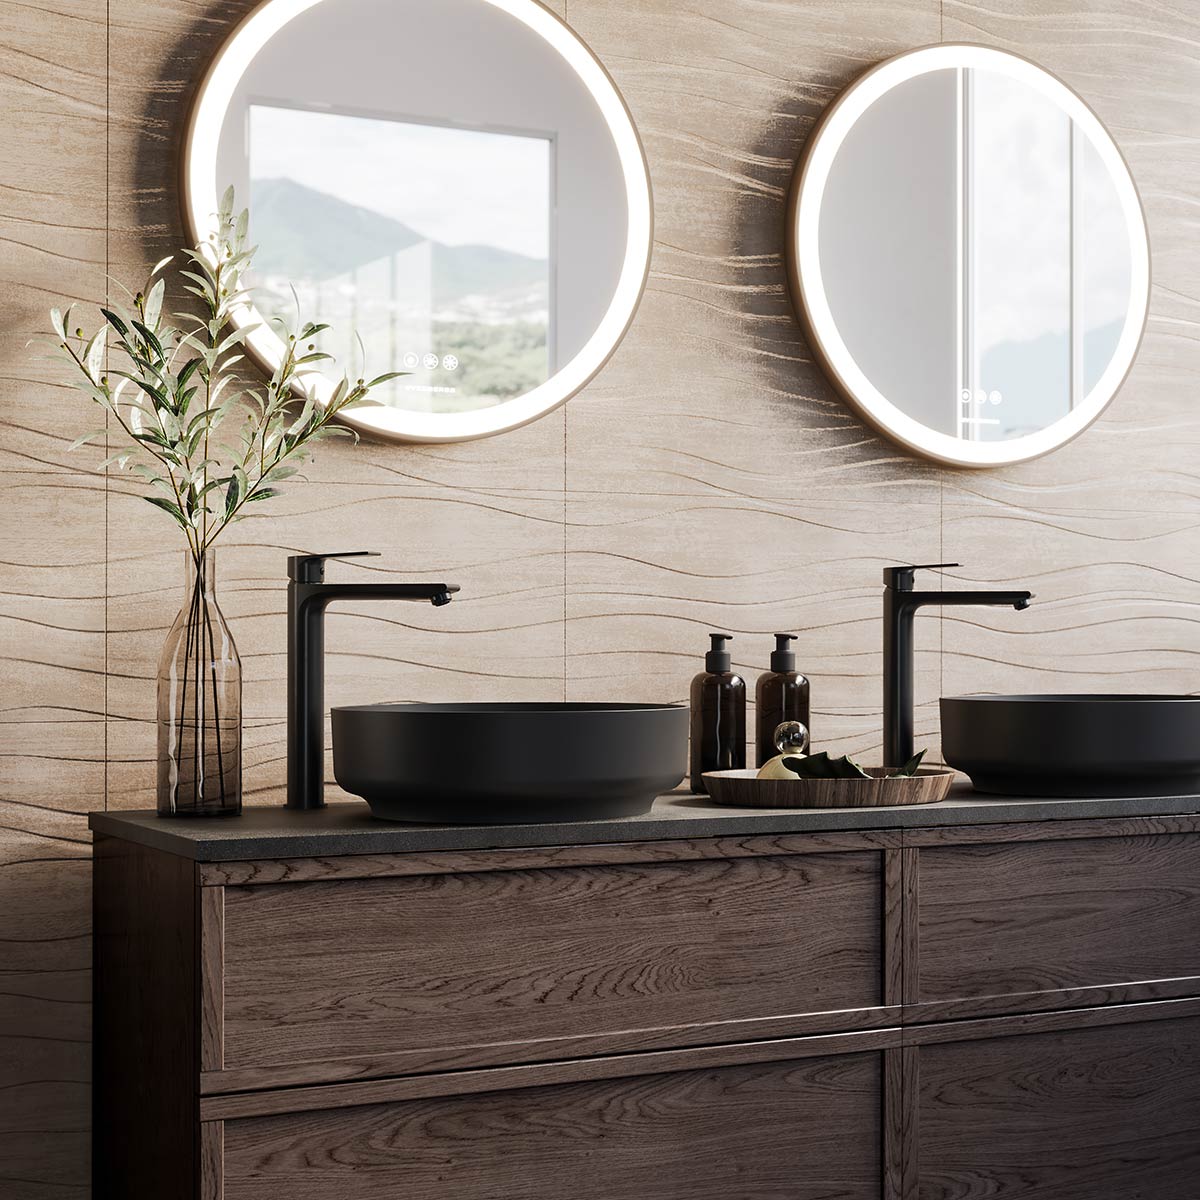 Our sit-on basins basins make for a beautiful feature in your bathroom.